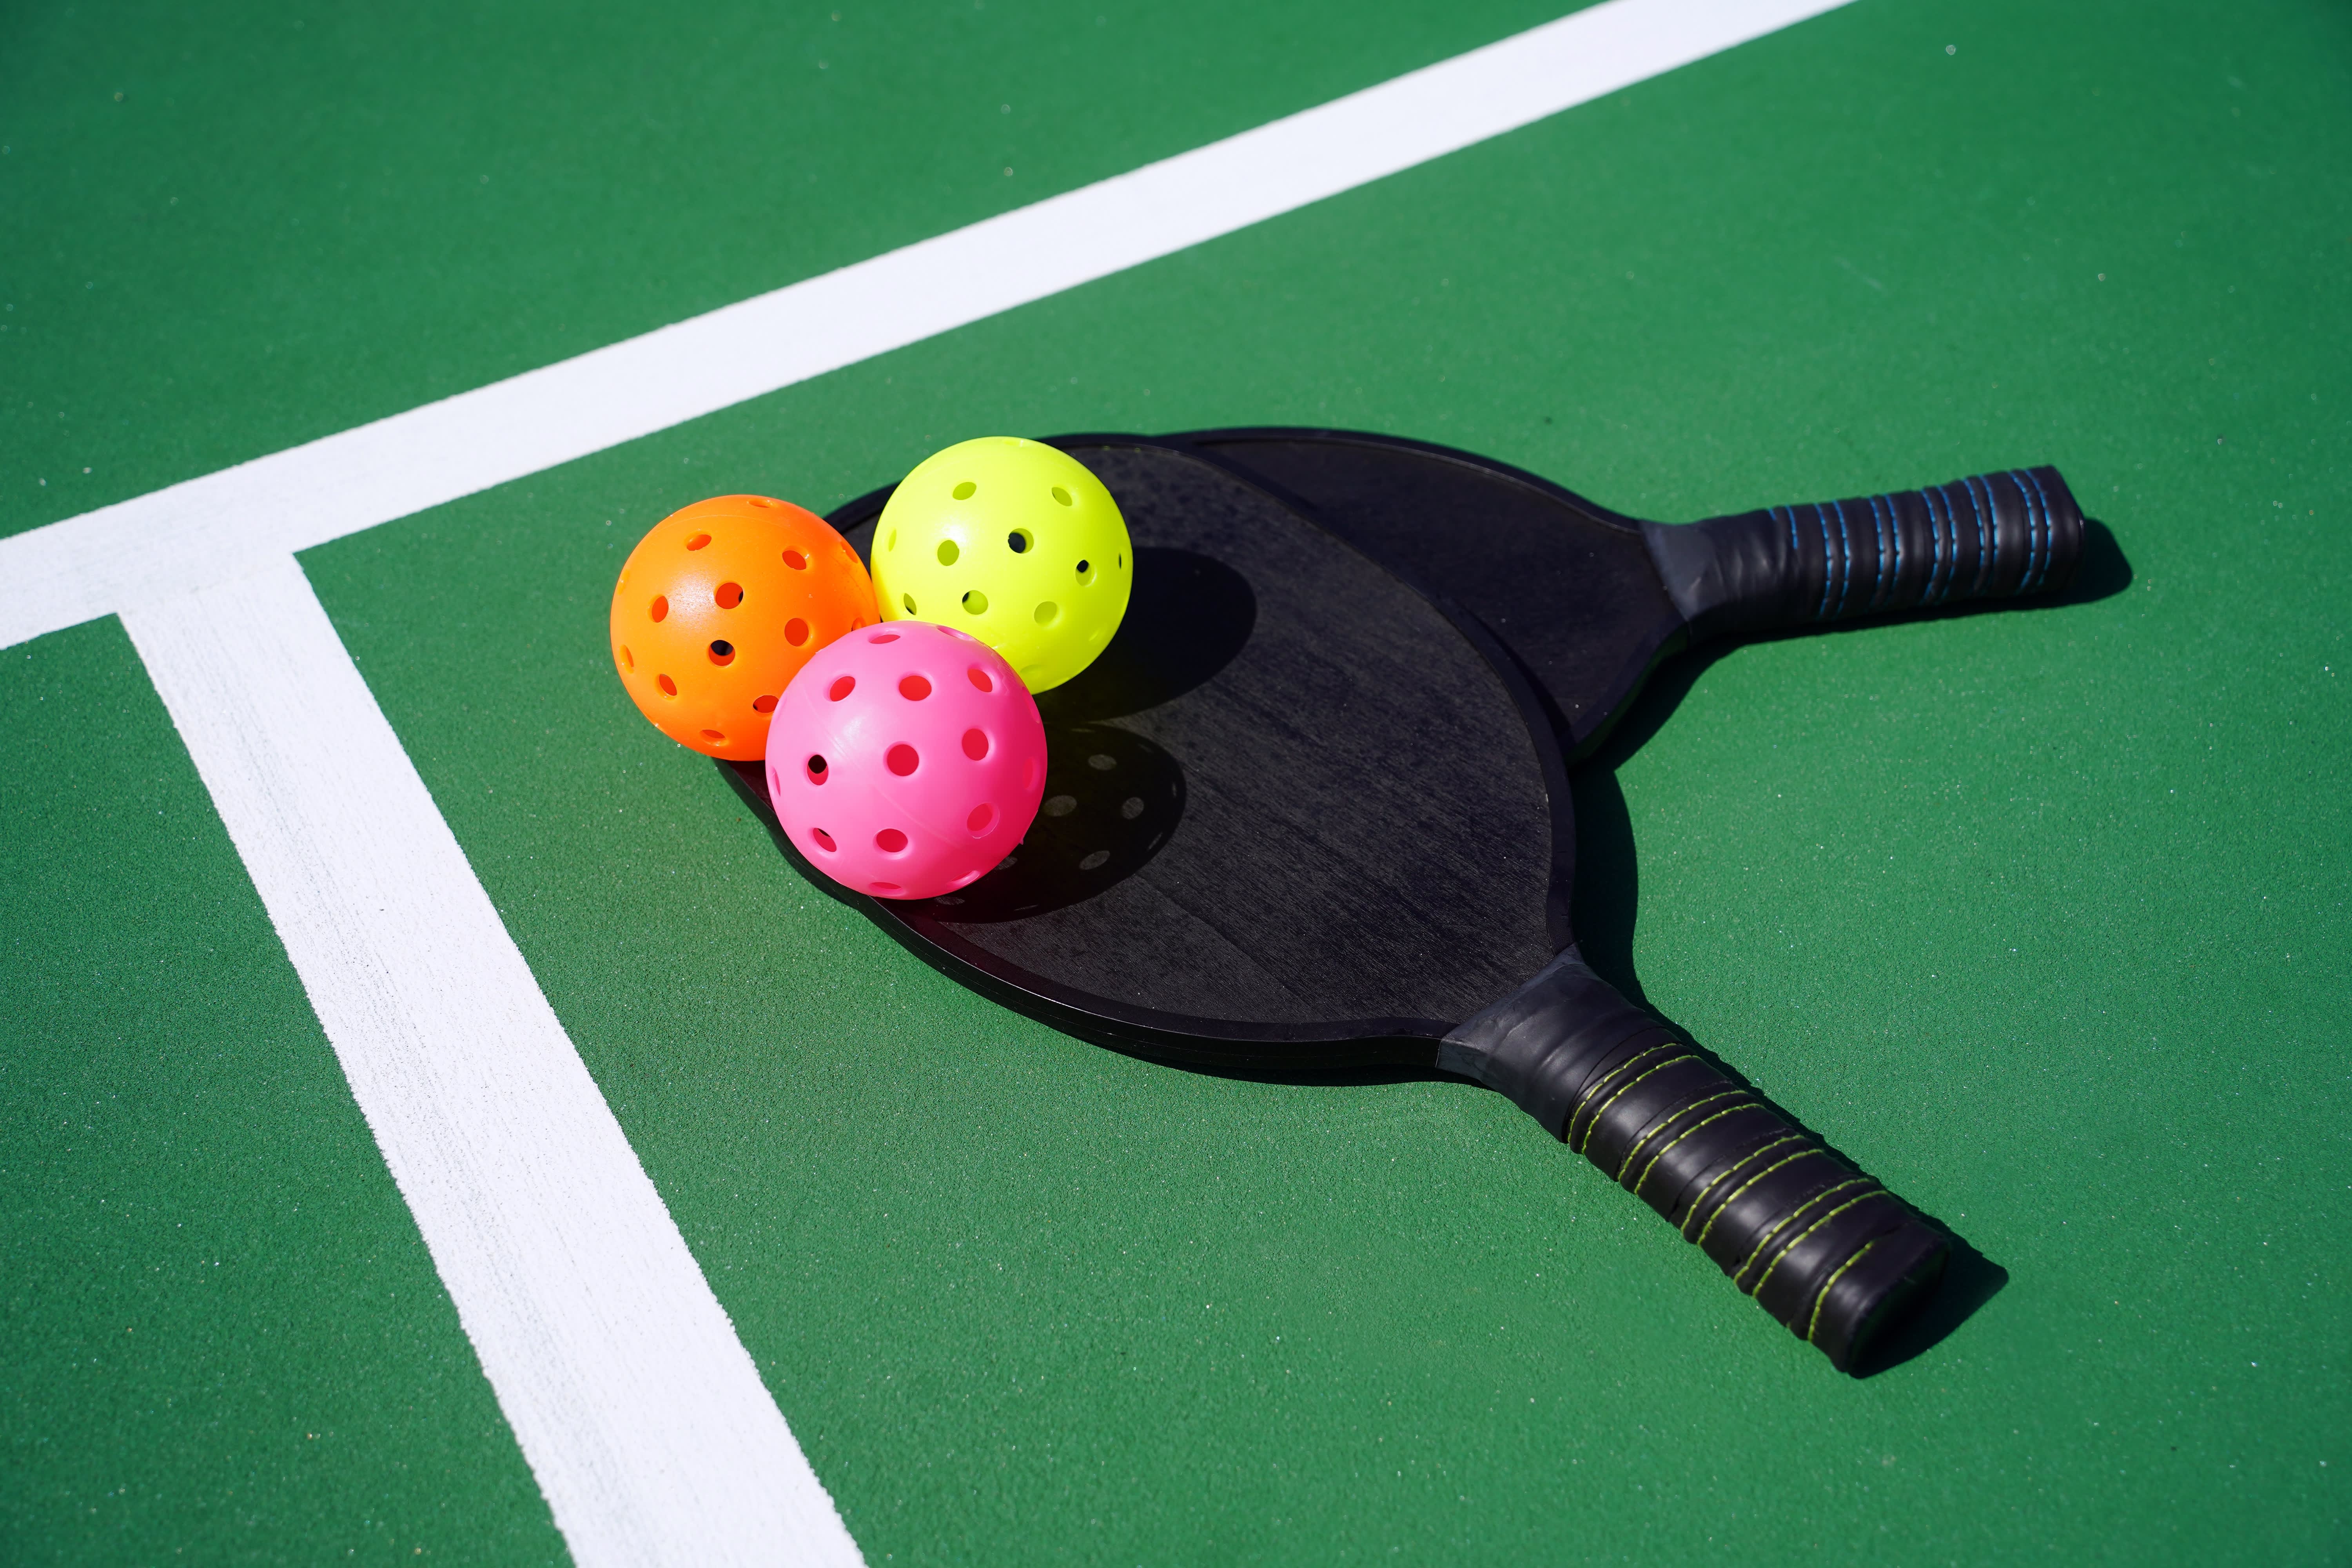 America's fastest growing sport is a cross between tennis, ping pong, and  badminton